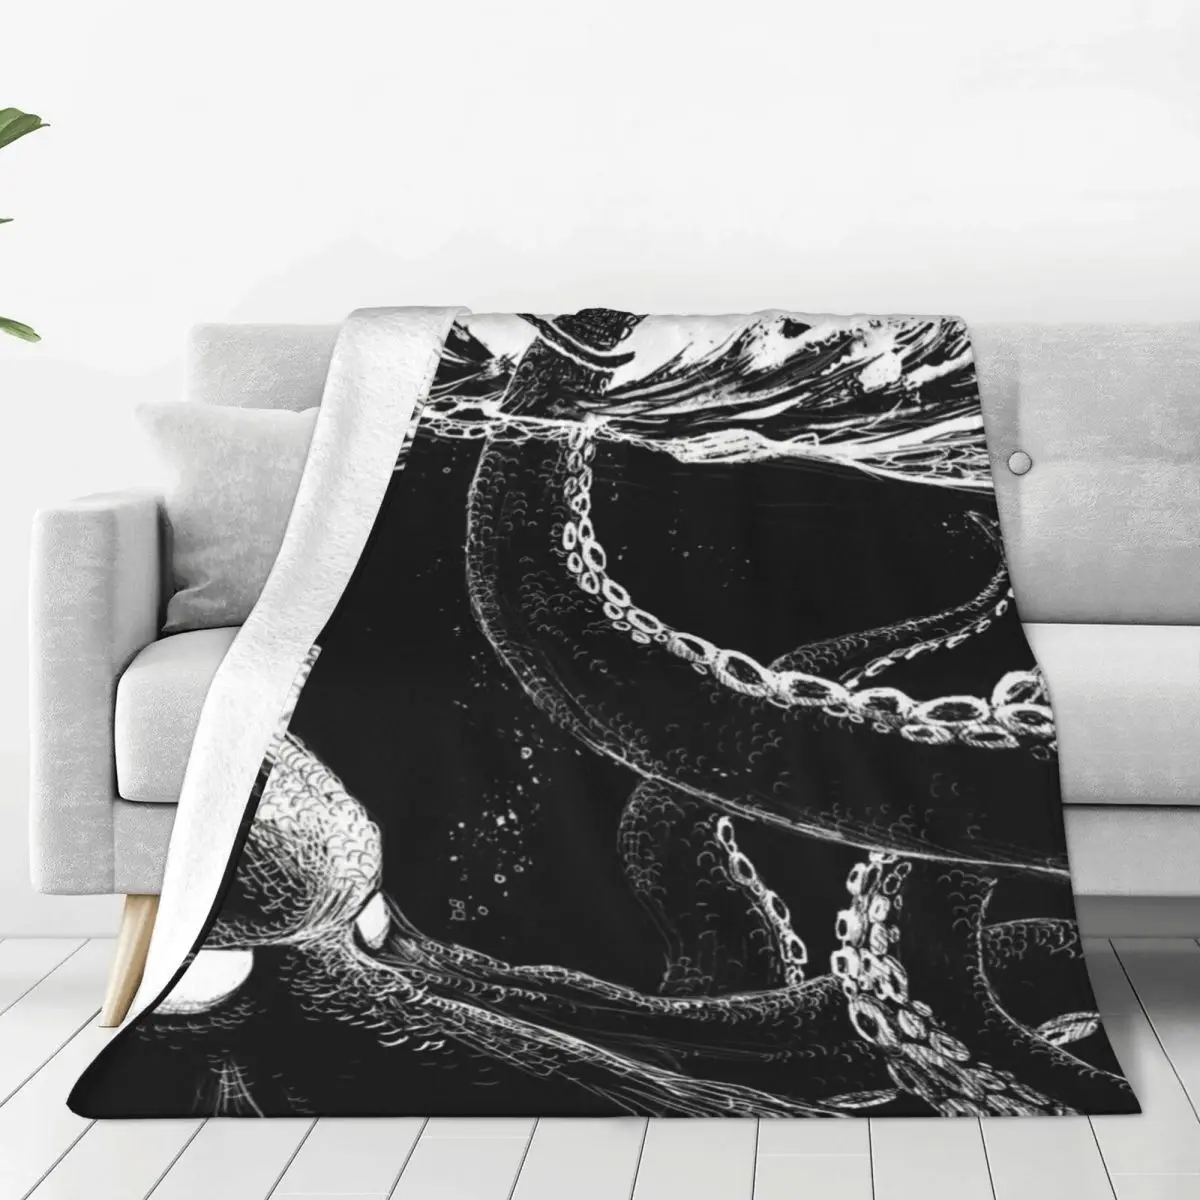 

Tentacles Kraken Rules The Sea Flannel Blankets horror anime Vintage Throw Blankets for Sofa Bedding Lounge 200x150cm Bedspreads